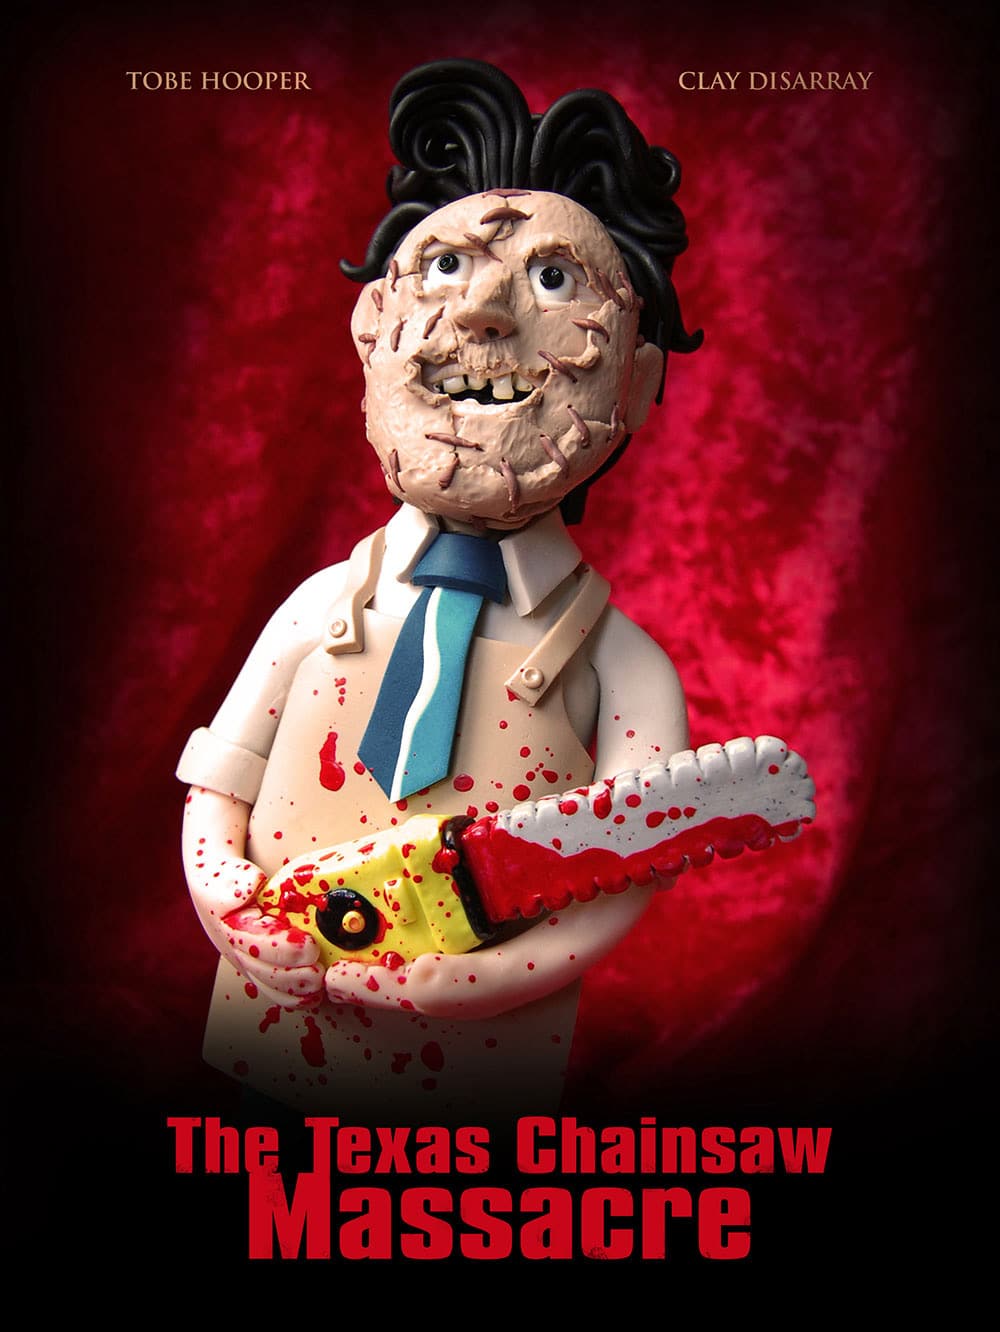 Lizzie Campbell is a clay disarray posters the texas chainsaw massacre